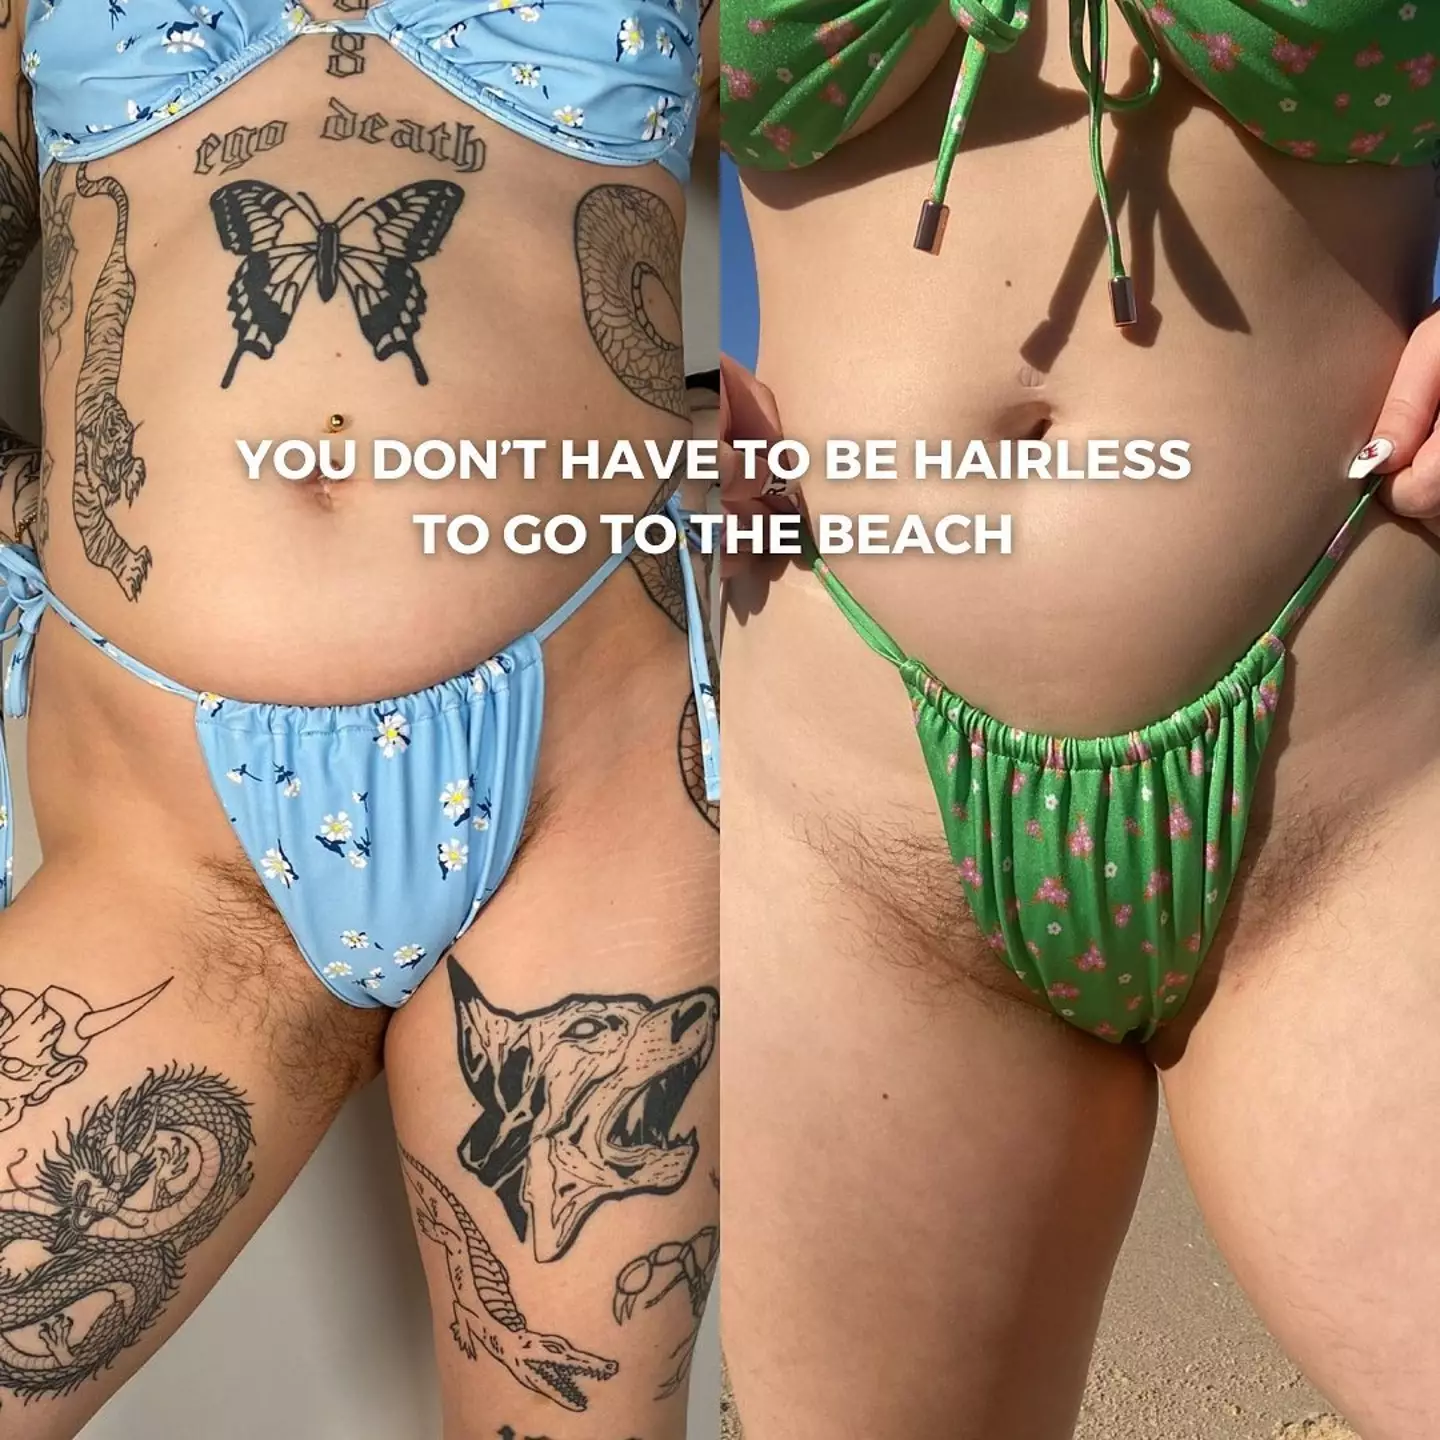 The women are encouraging others to feel confident with their body hair.